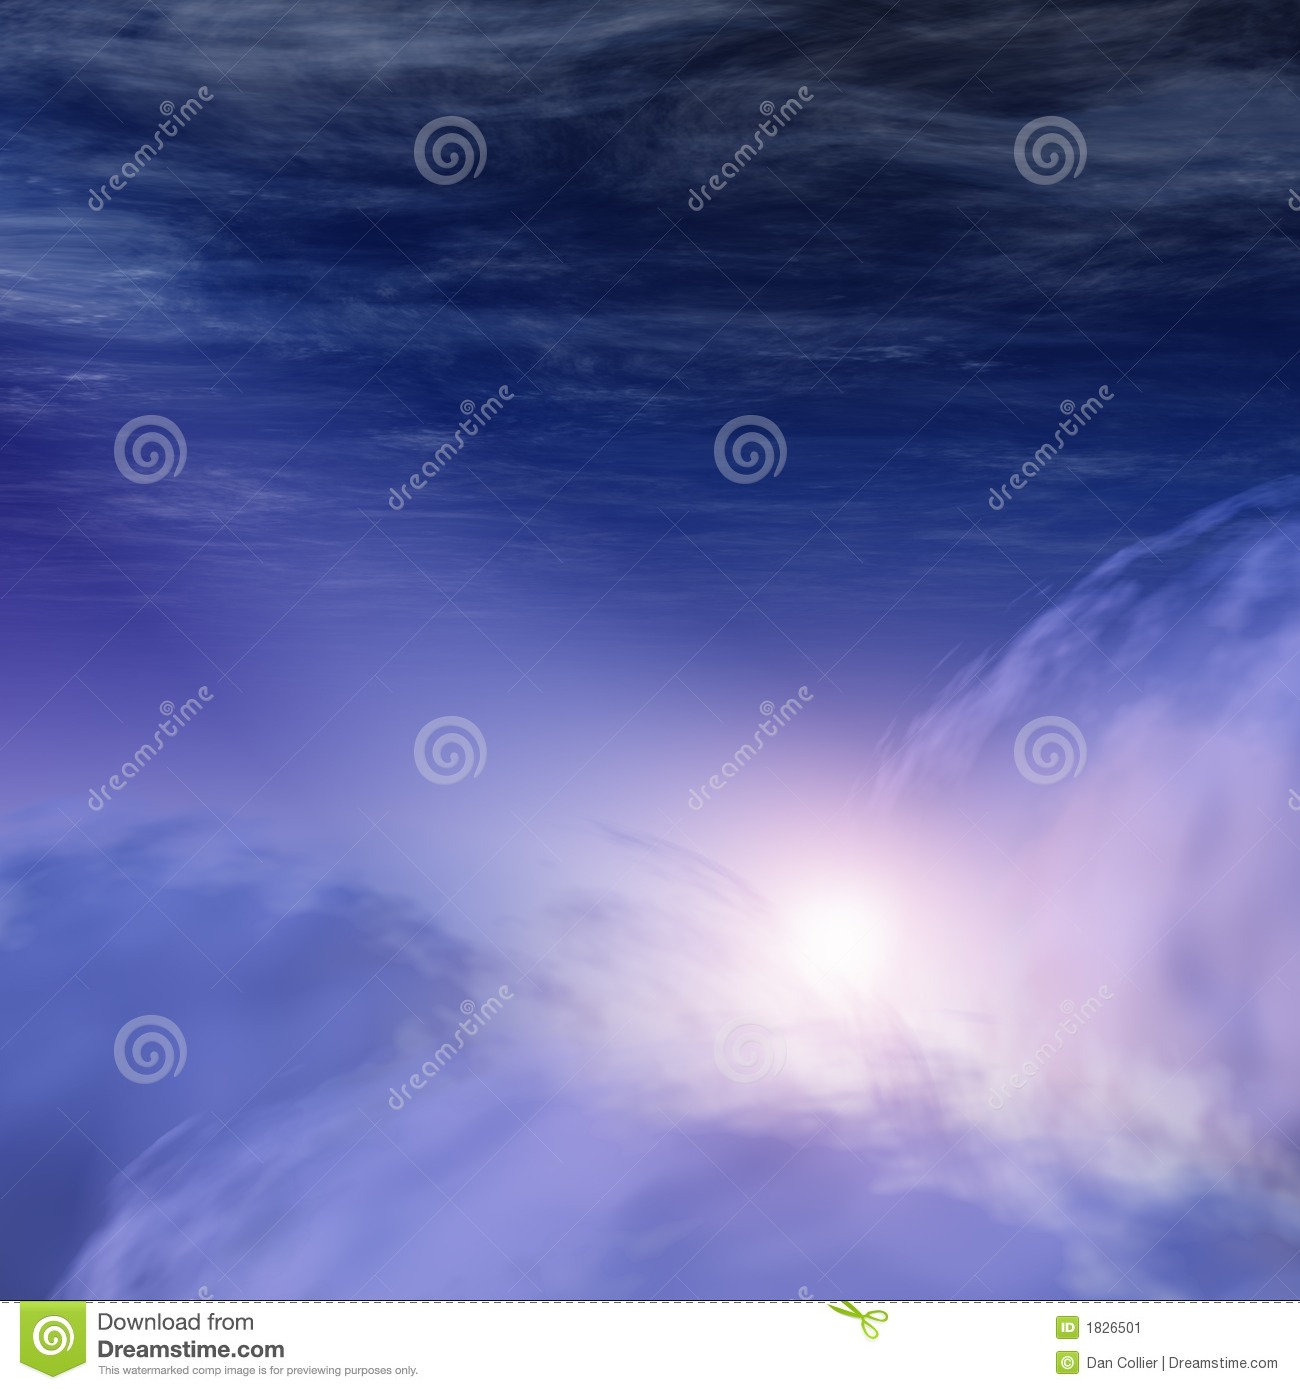 God Rays In Heavenly Clouds Stock Image   Image  1826501